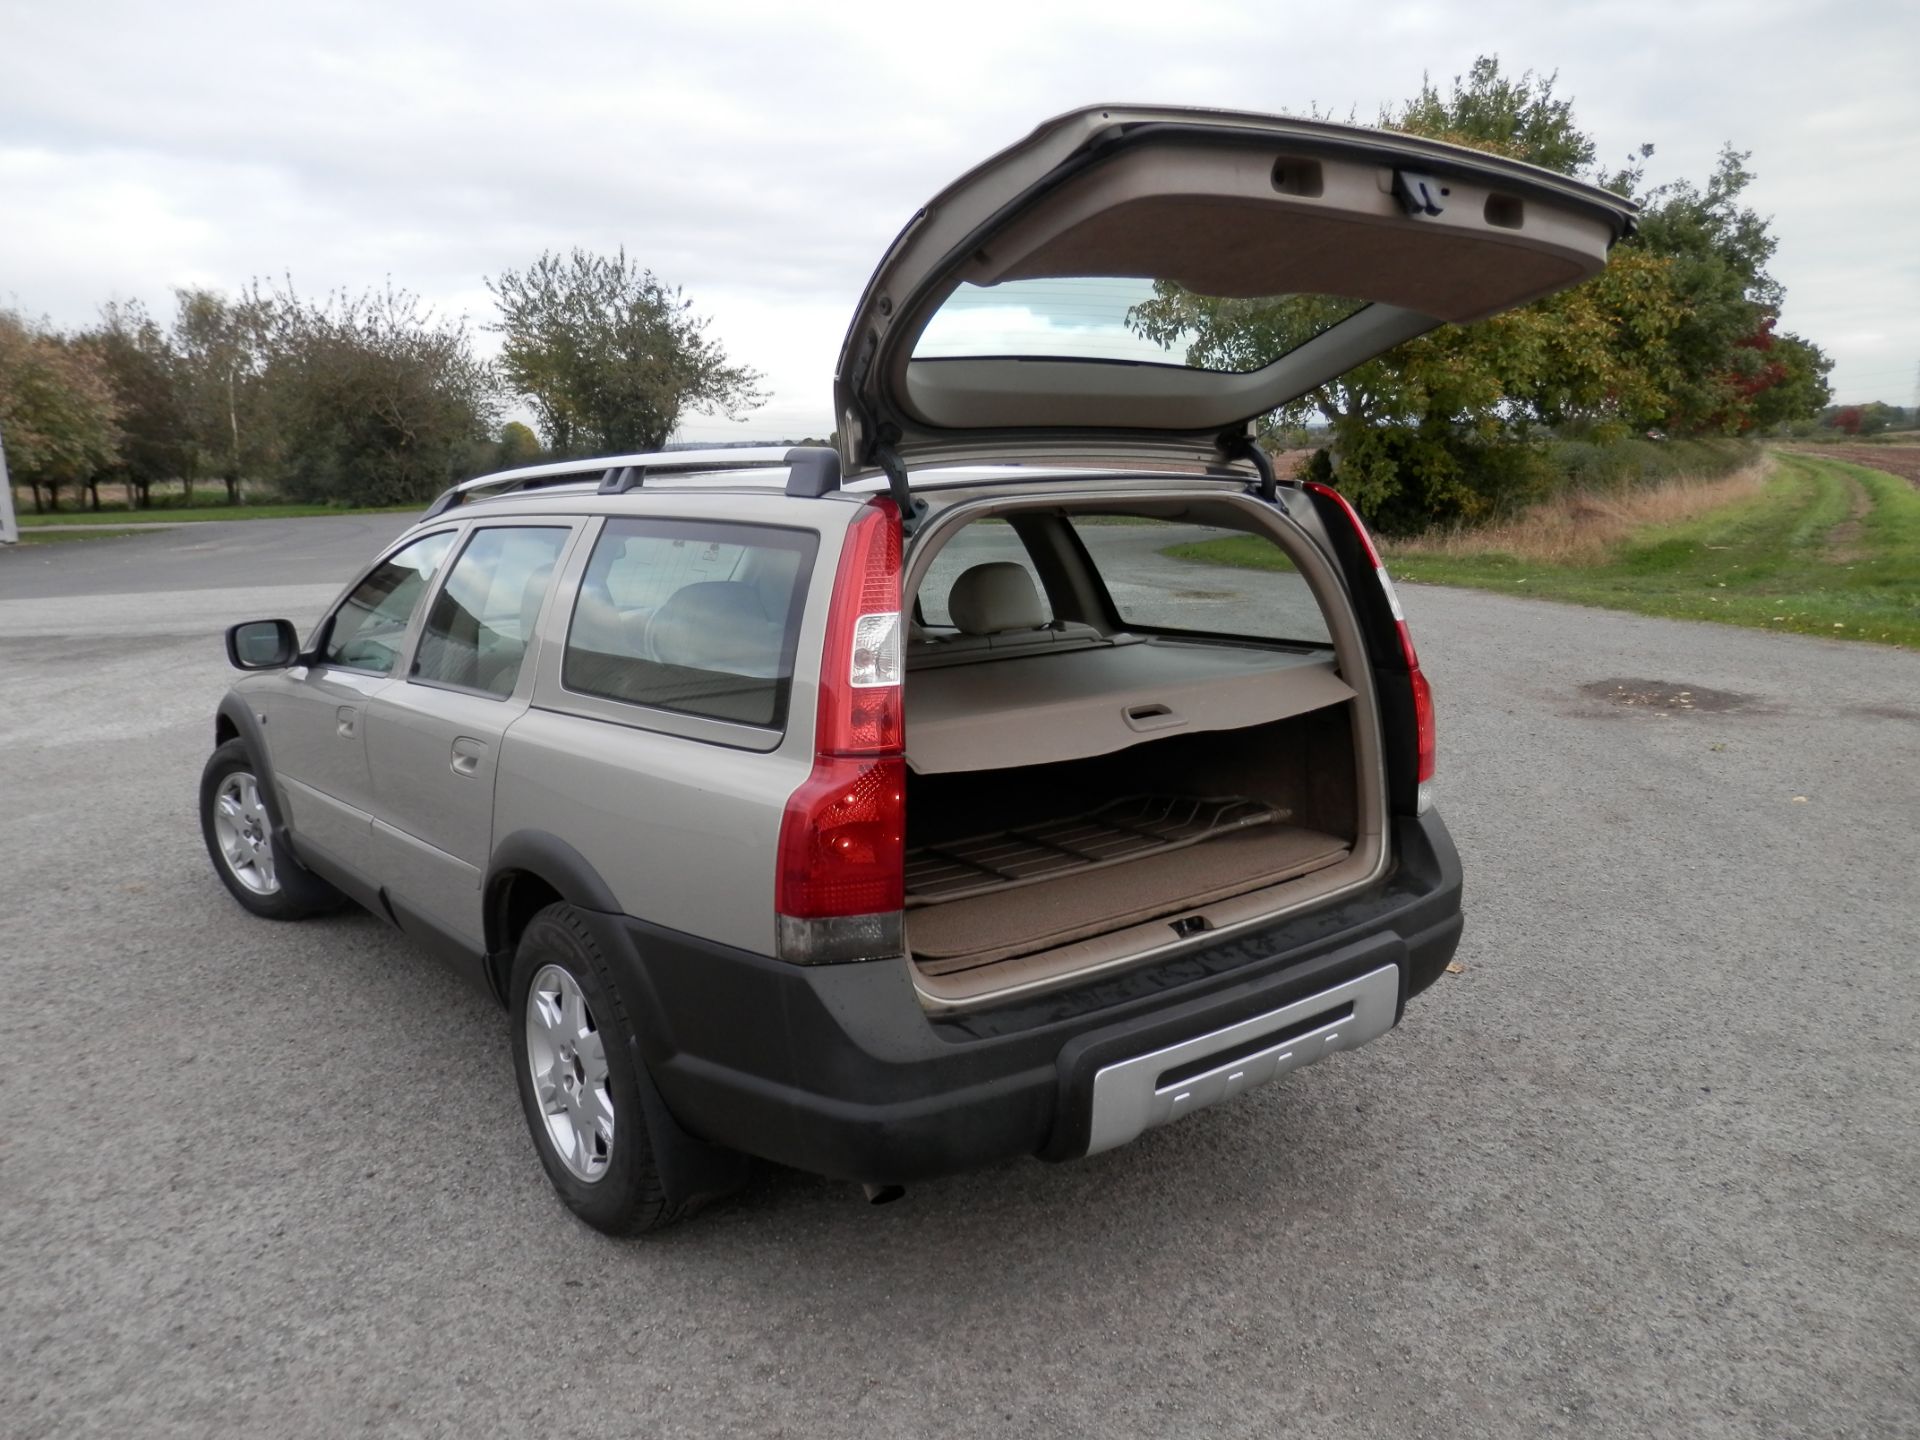 2005/05 VOLVO XC70 CROSS COUNTRY 2.4 D5 DIESEL AUTOMATIC, 4 WHEEL DRIVE, MOT MAY 2017, 150K MILES. - Image 6 of 26